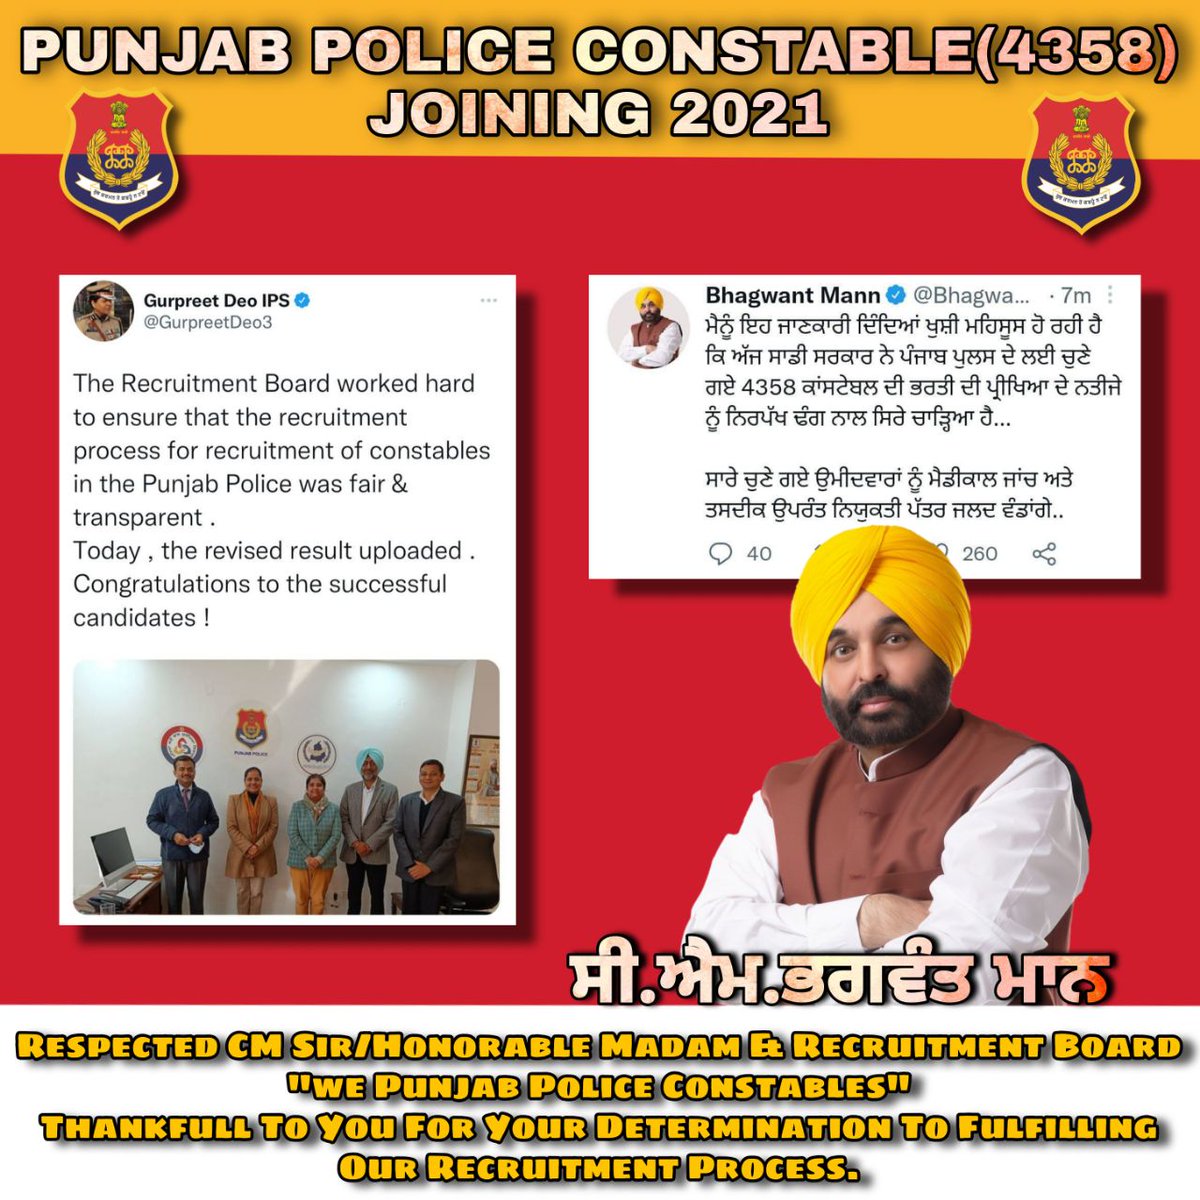 @BhagwantMann @DGPPunjabPolice @GurpreetDeo3 @PunjabPoliceInd 'We Punjab Police Constables' Thankfull To You For Your Determination To Fulfilling Our Recruitment Process.......